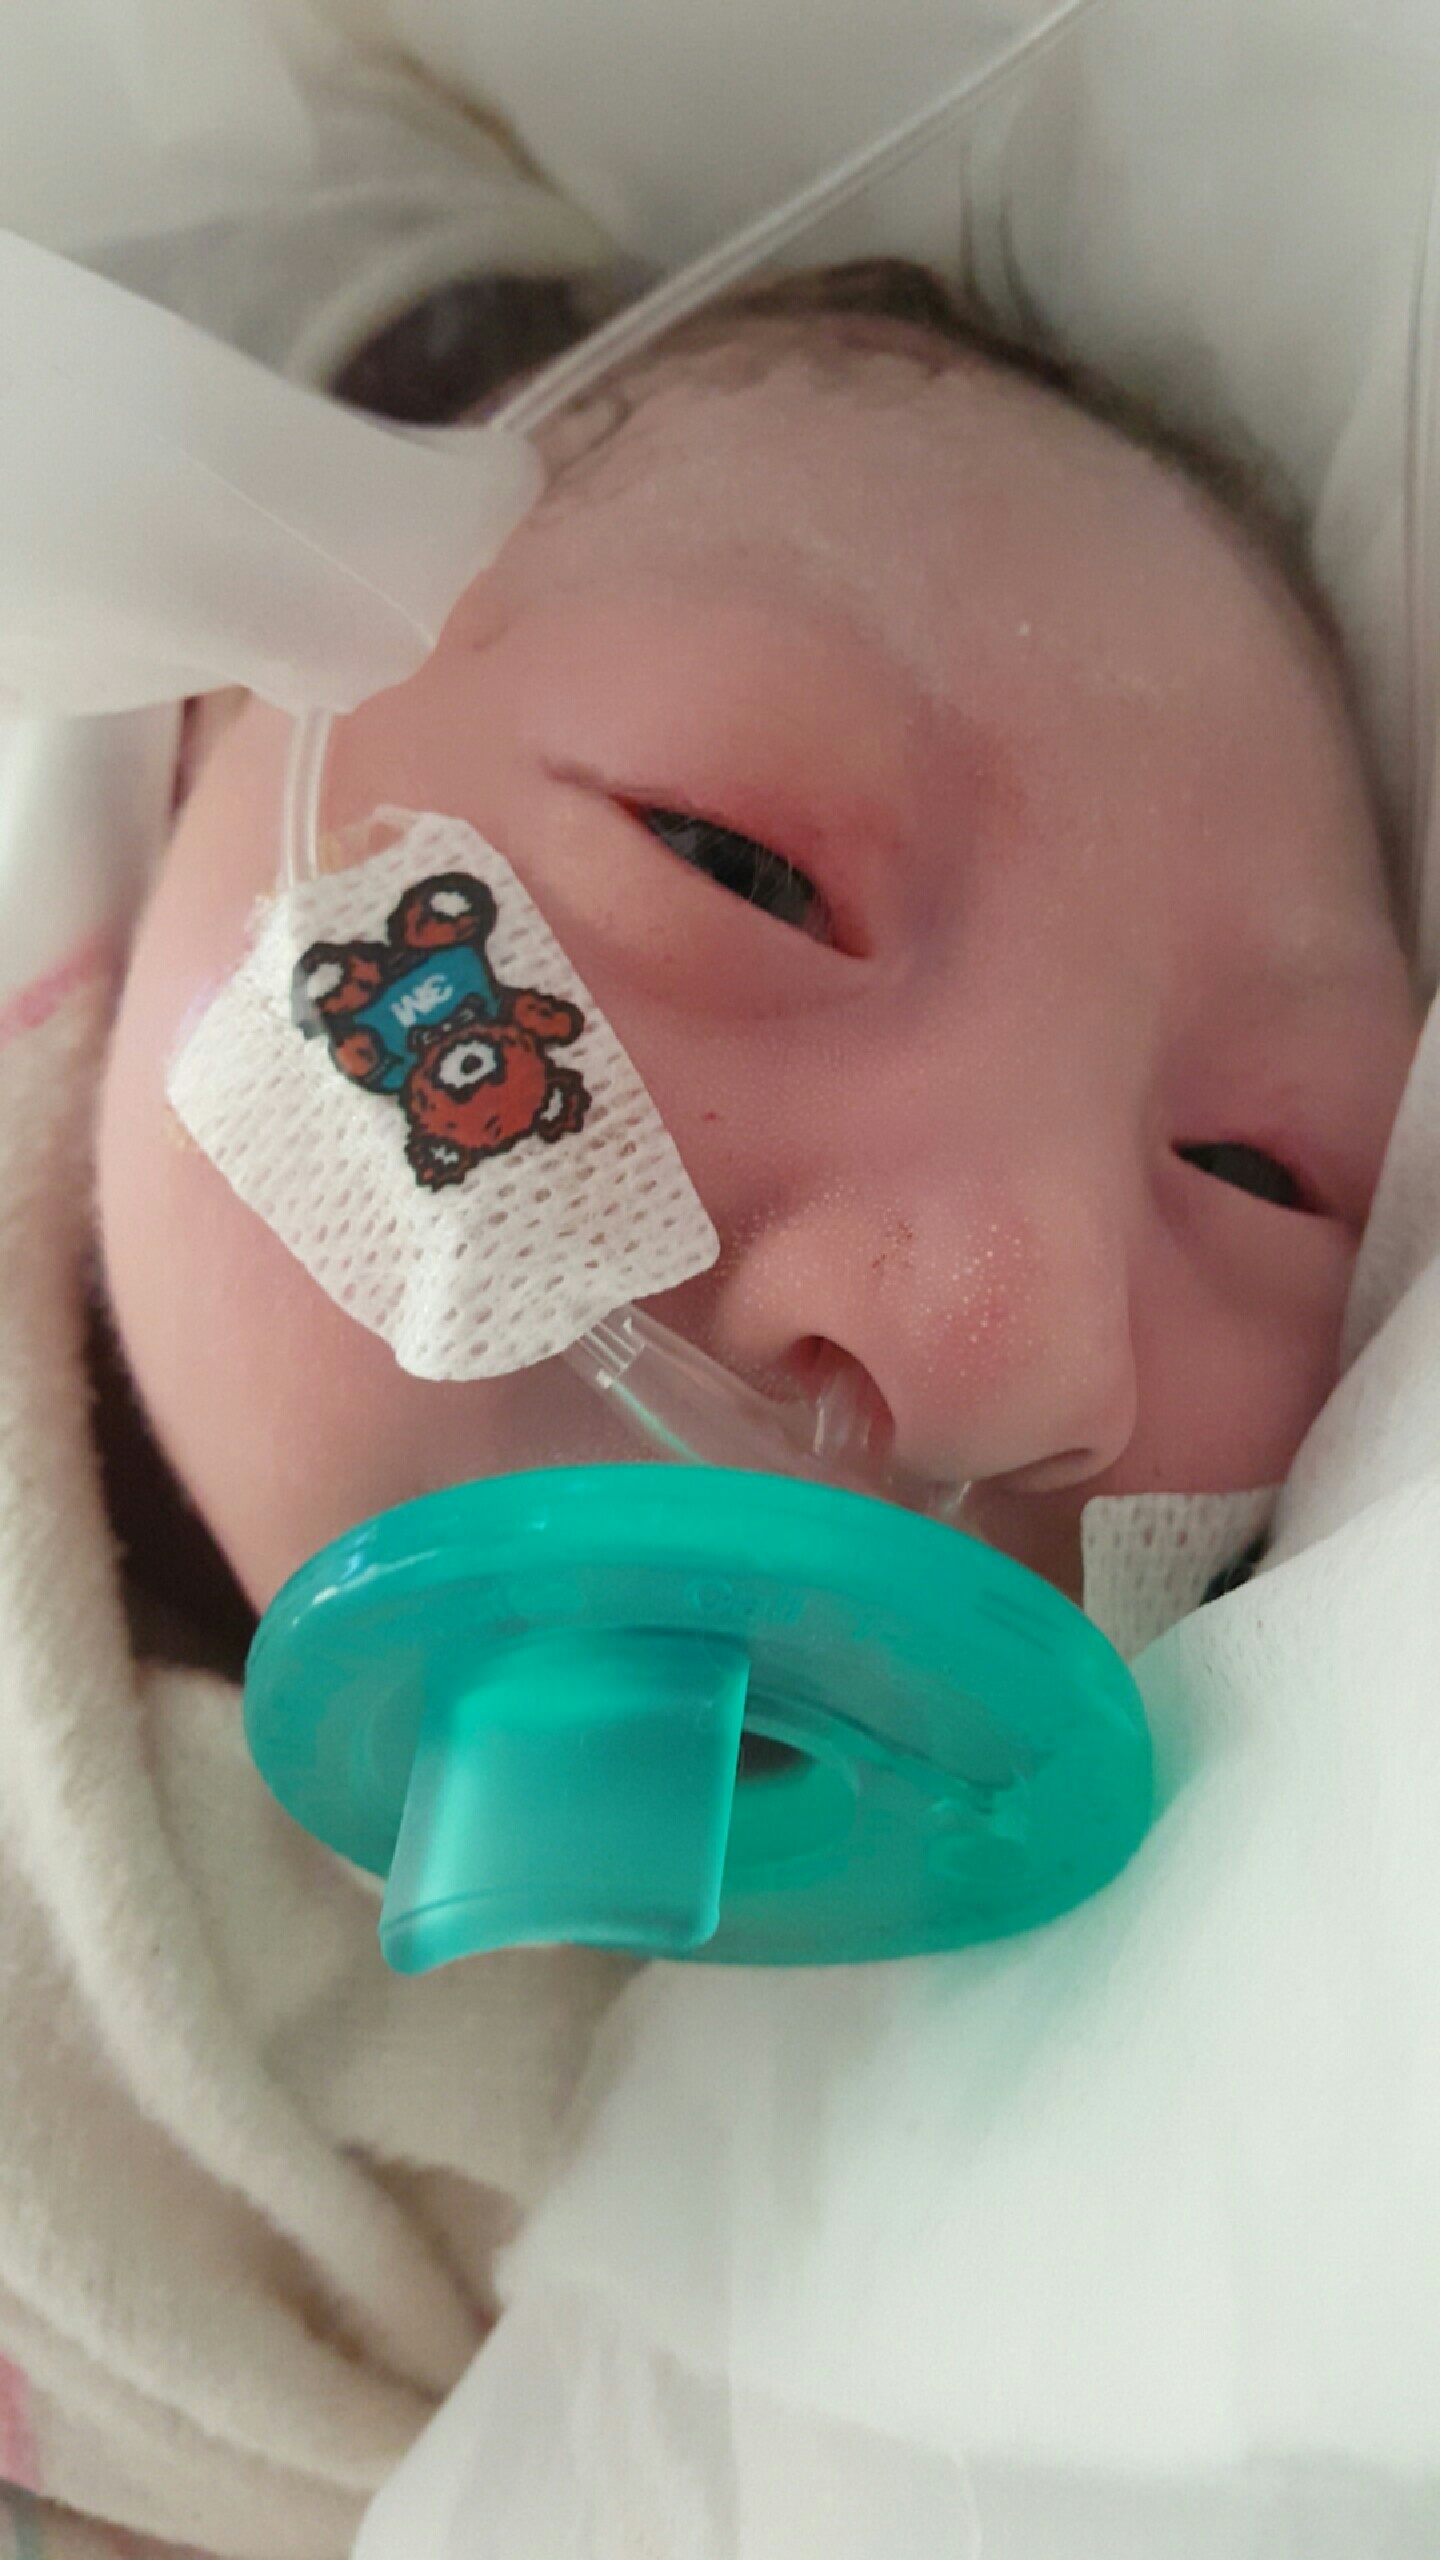 CHOC patient Michelle with a pacifier when she was in the NICU